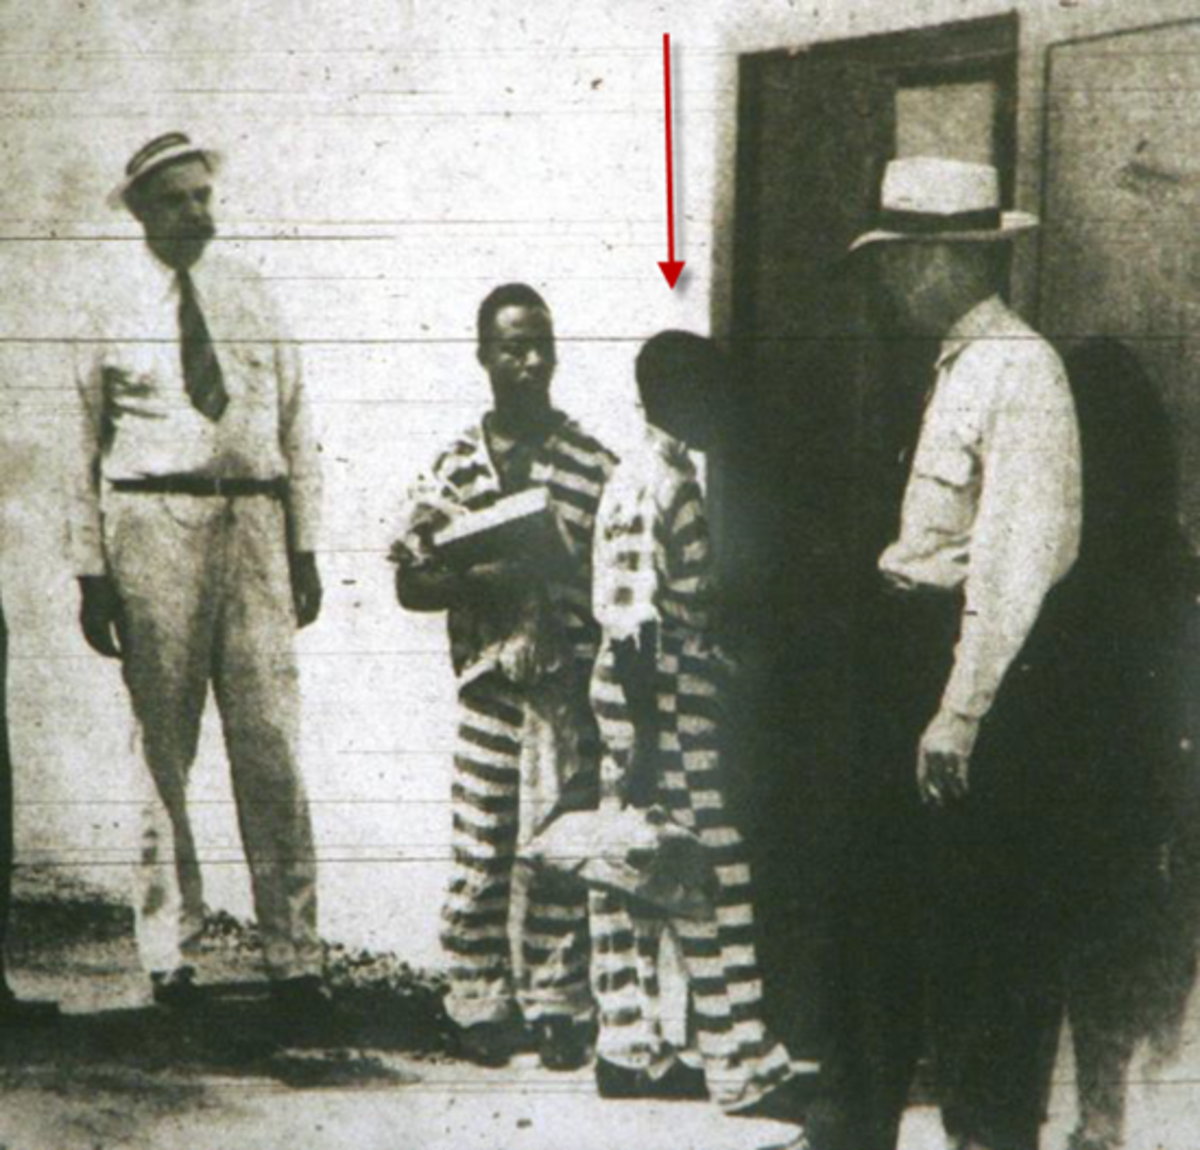 George Stinney, Age 14 Heading To Electric Chair